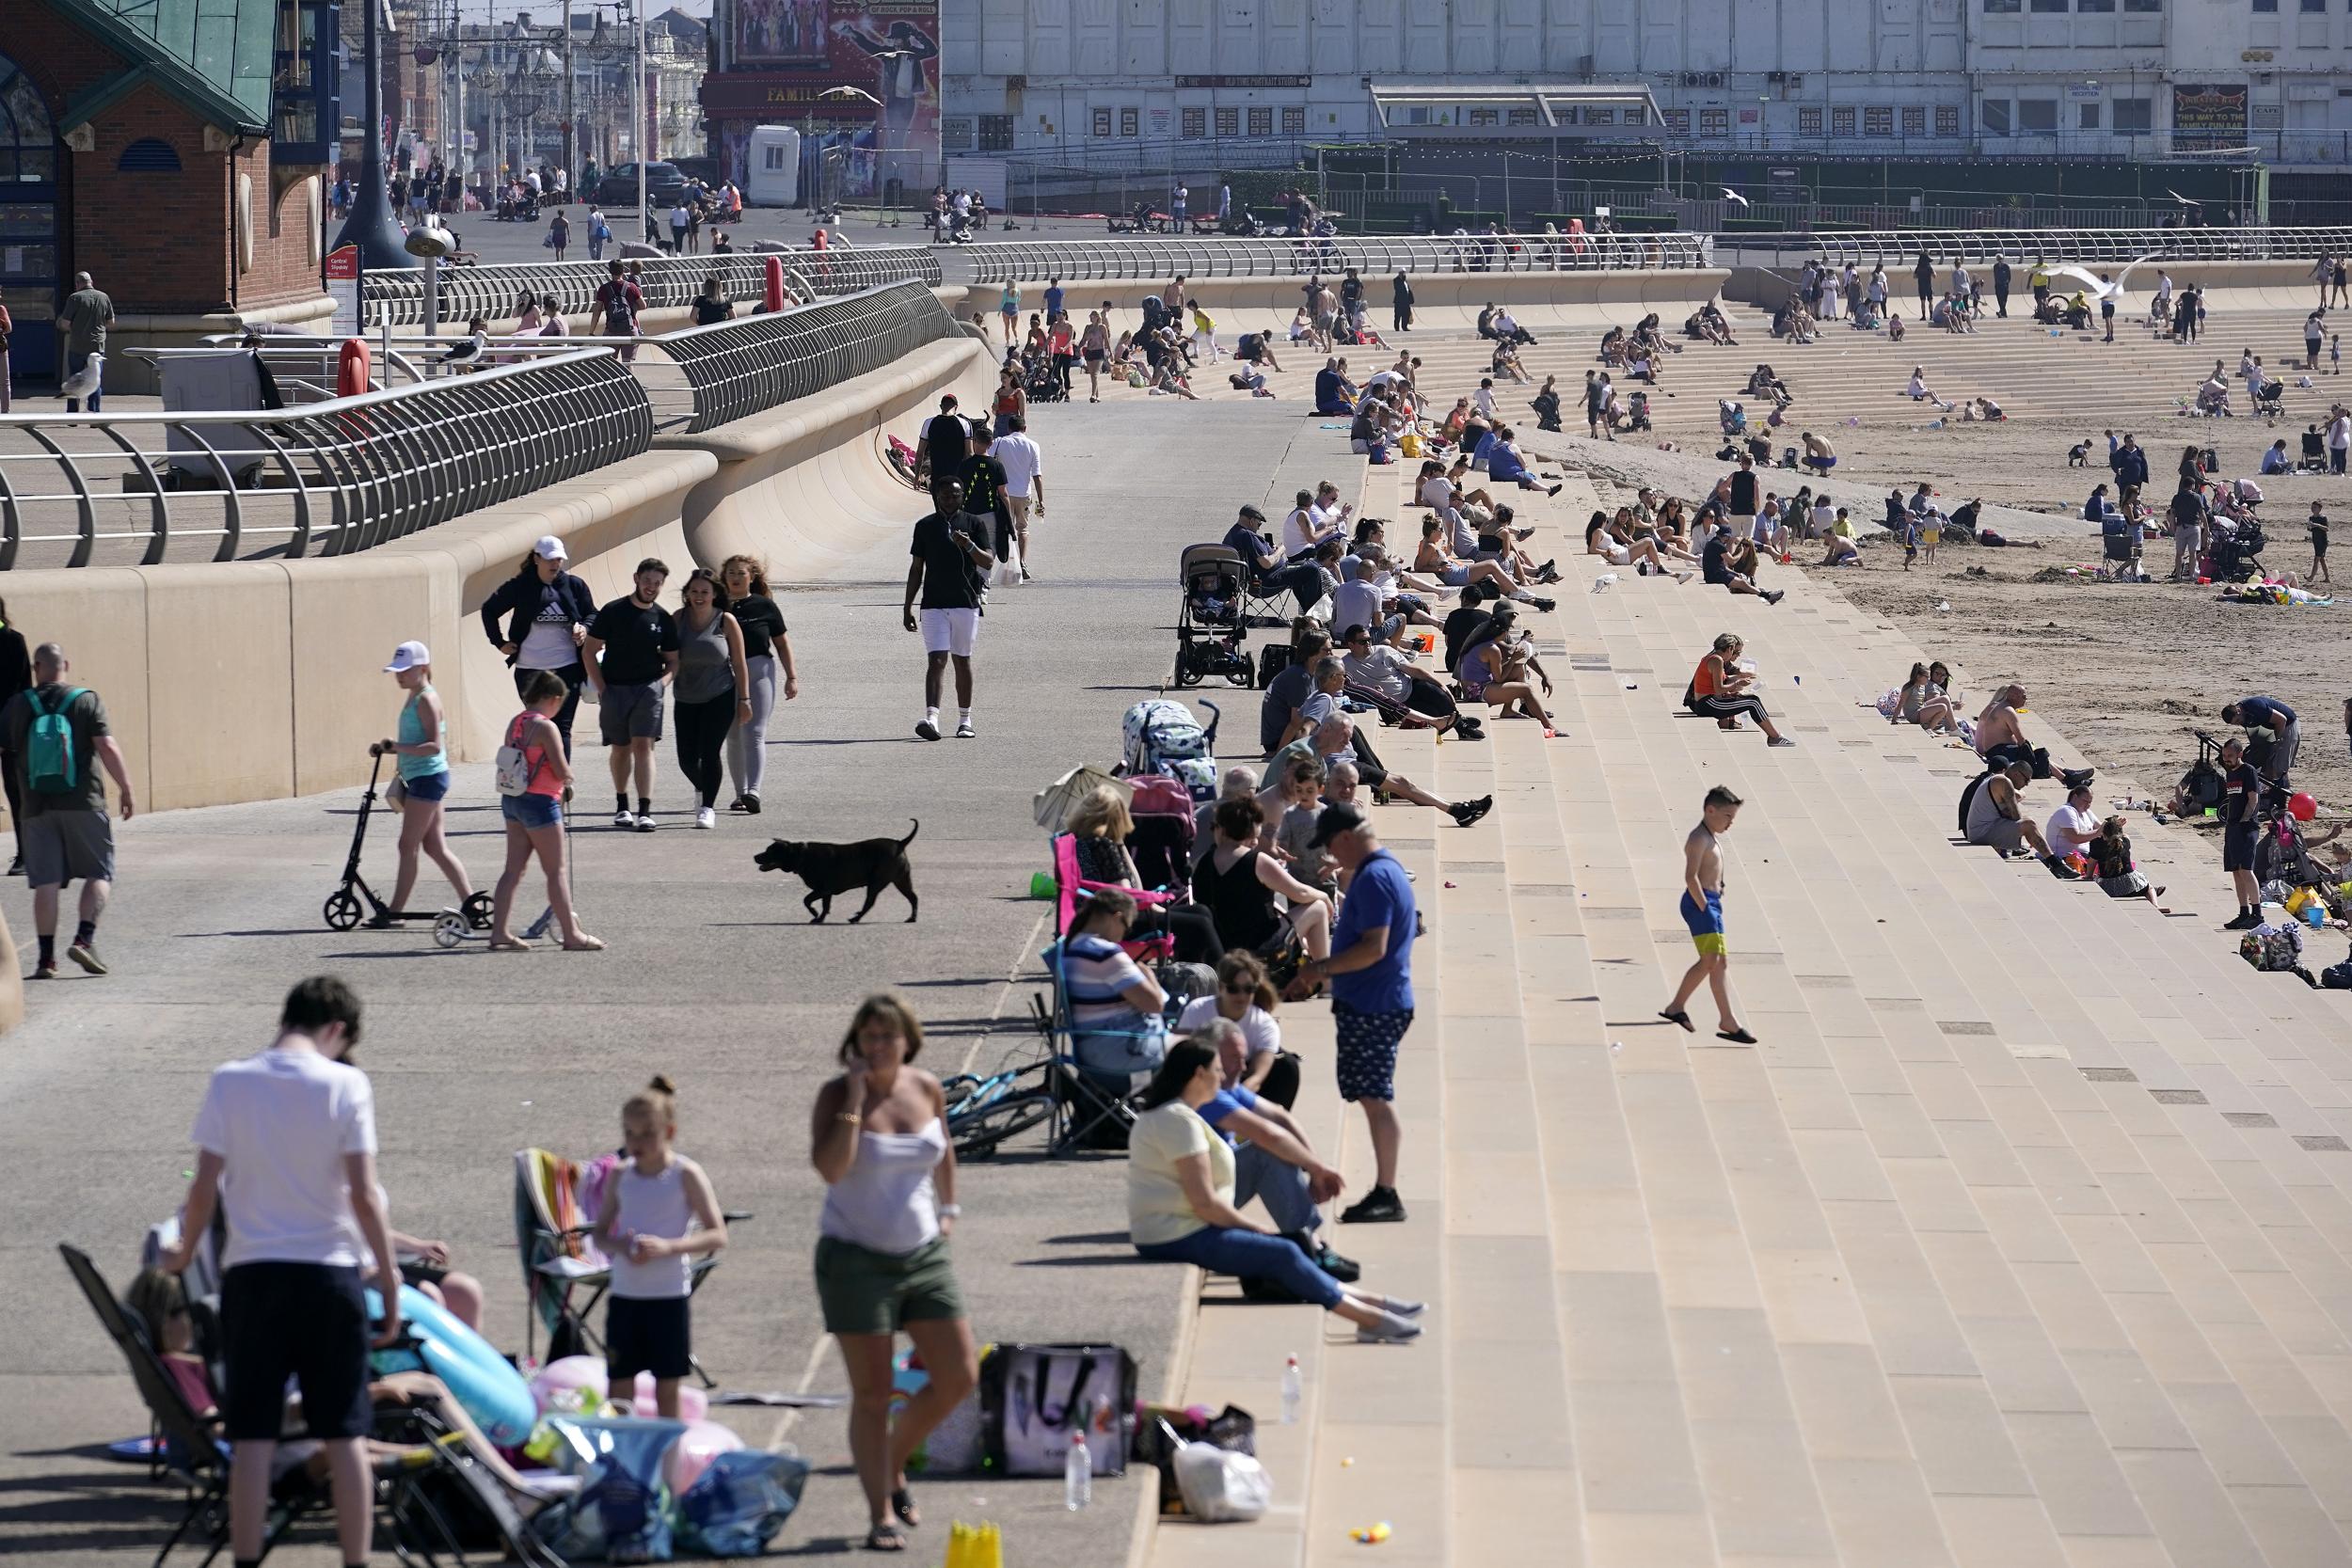 The warm temperatures lured sunbathers across the country and tested the capacity of parks and beaches to accommodate social distanced crowds (Getty Images)